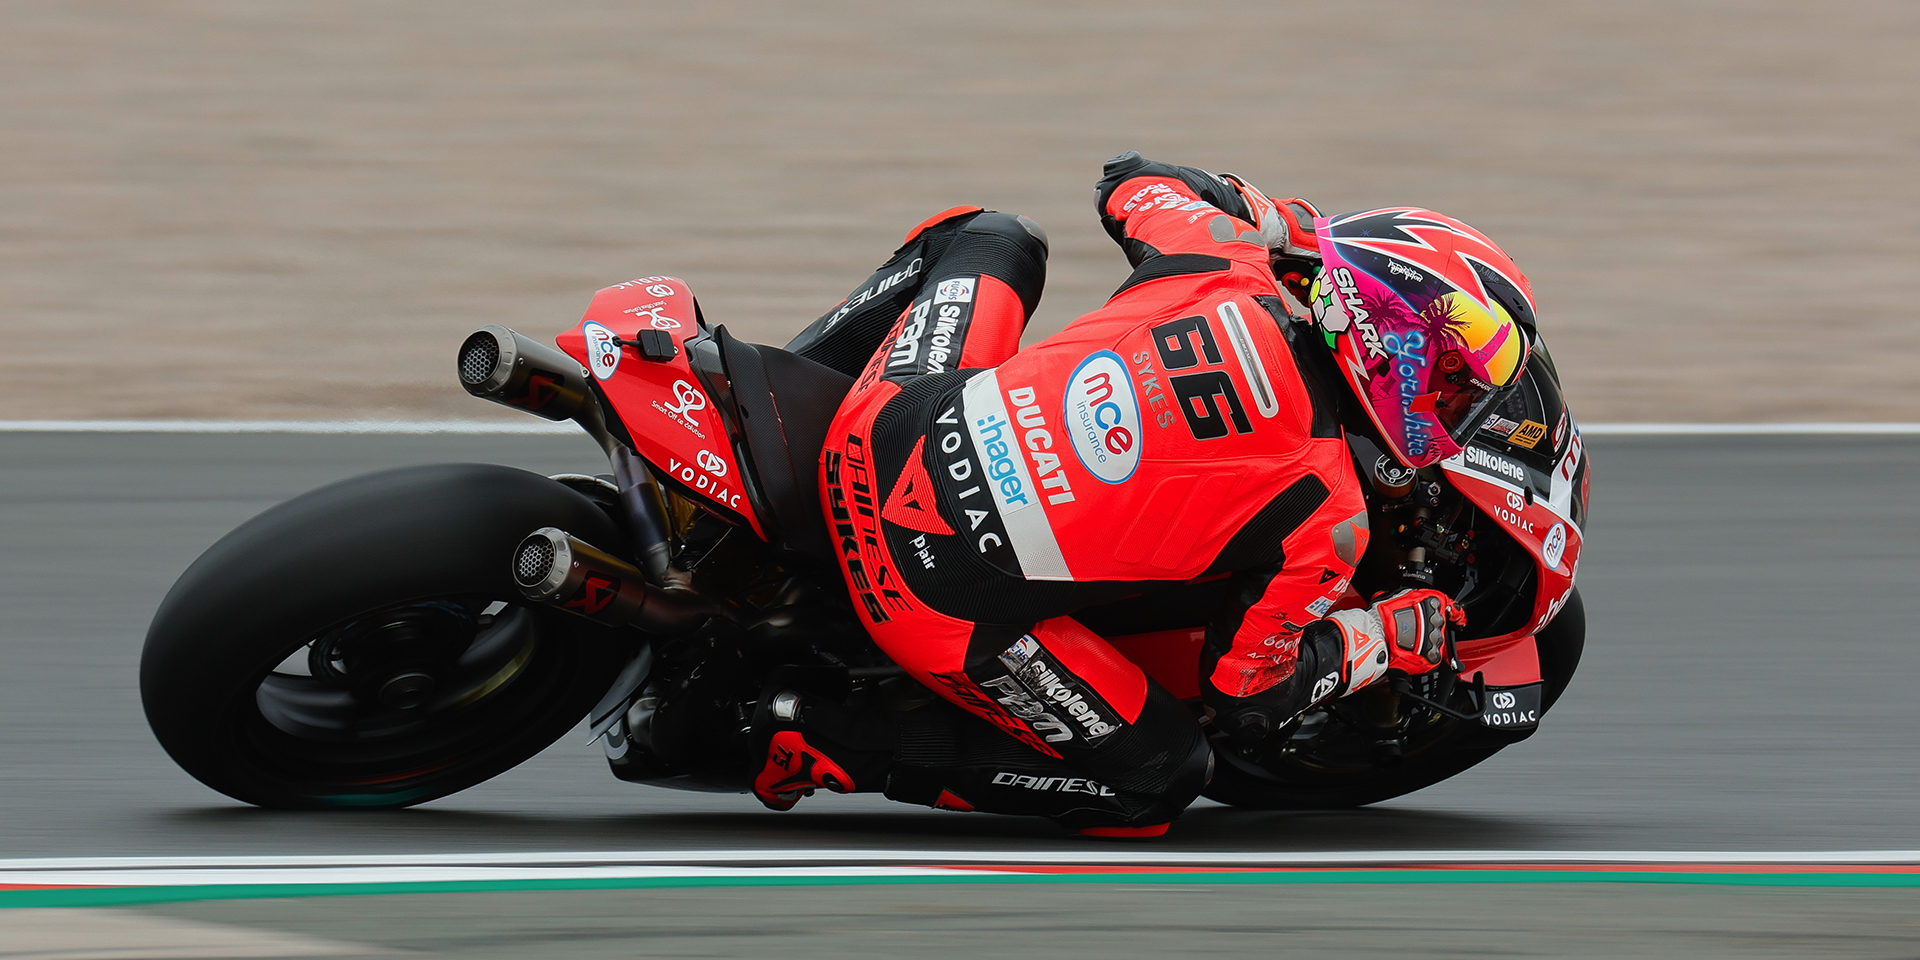 Tough day at Donington for MCE Ducati